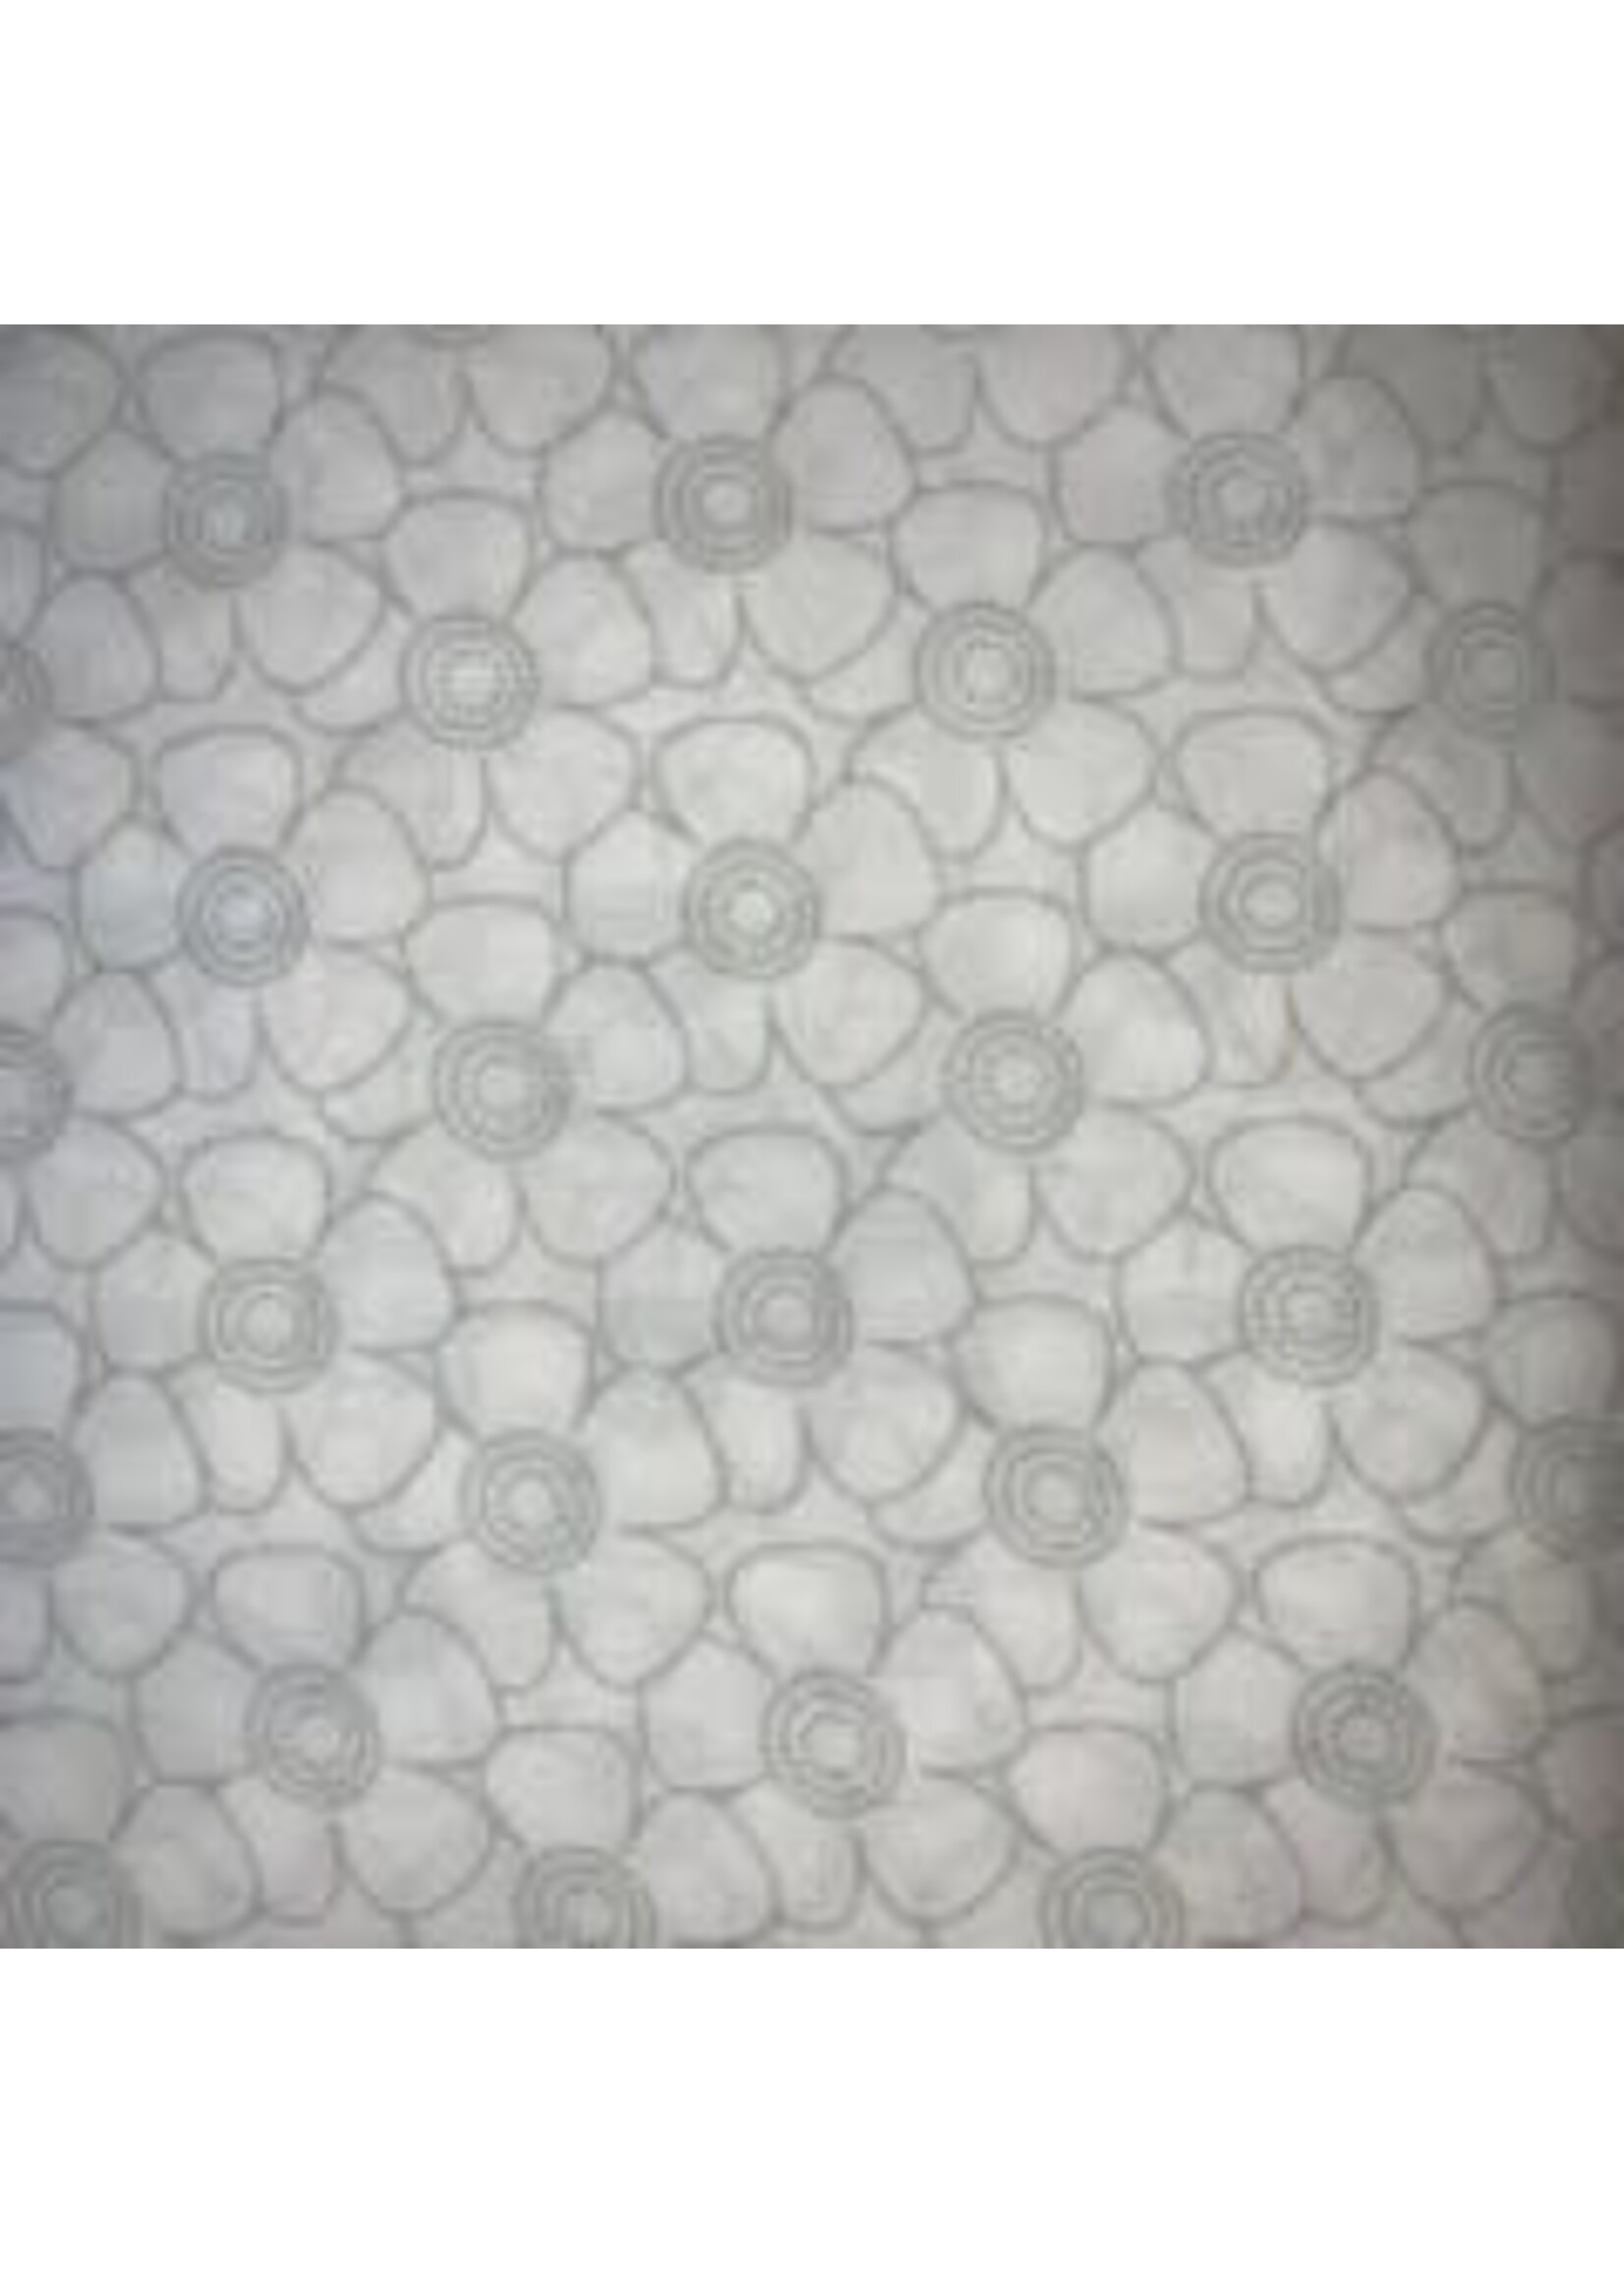 Quiltback - Daisy - White/Grey - Coupon - 170 cm x 275 cm